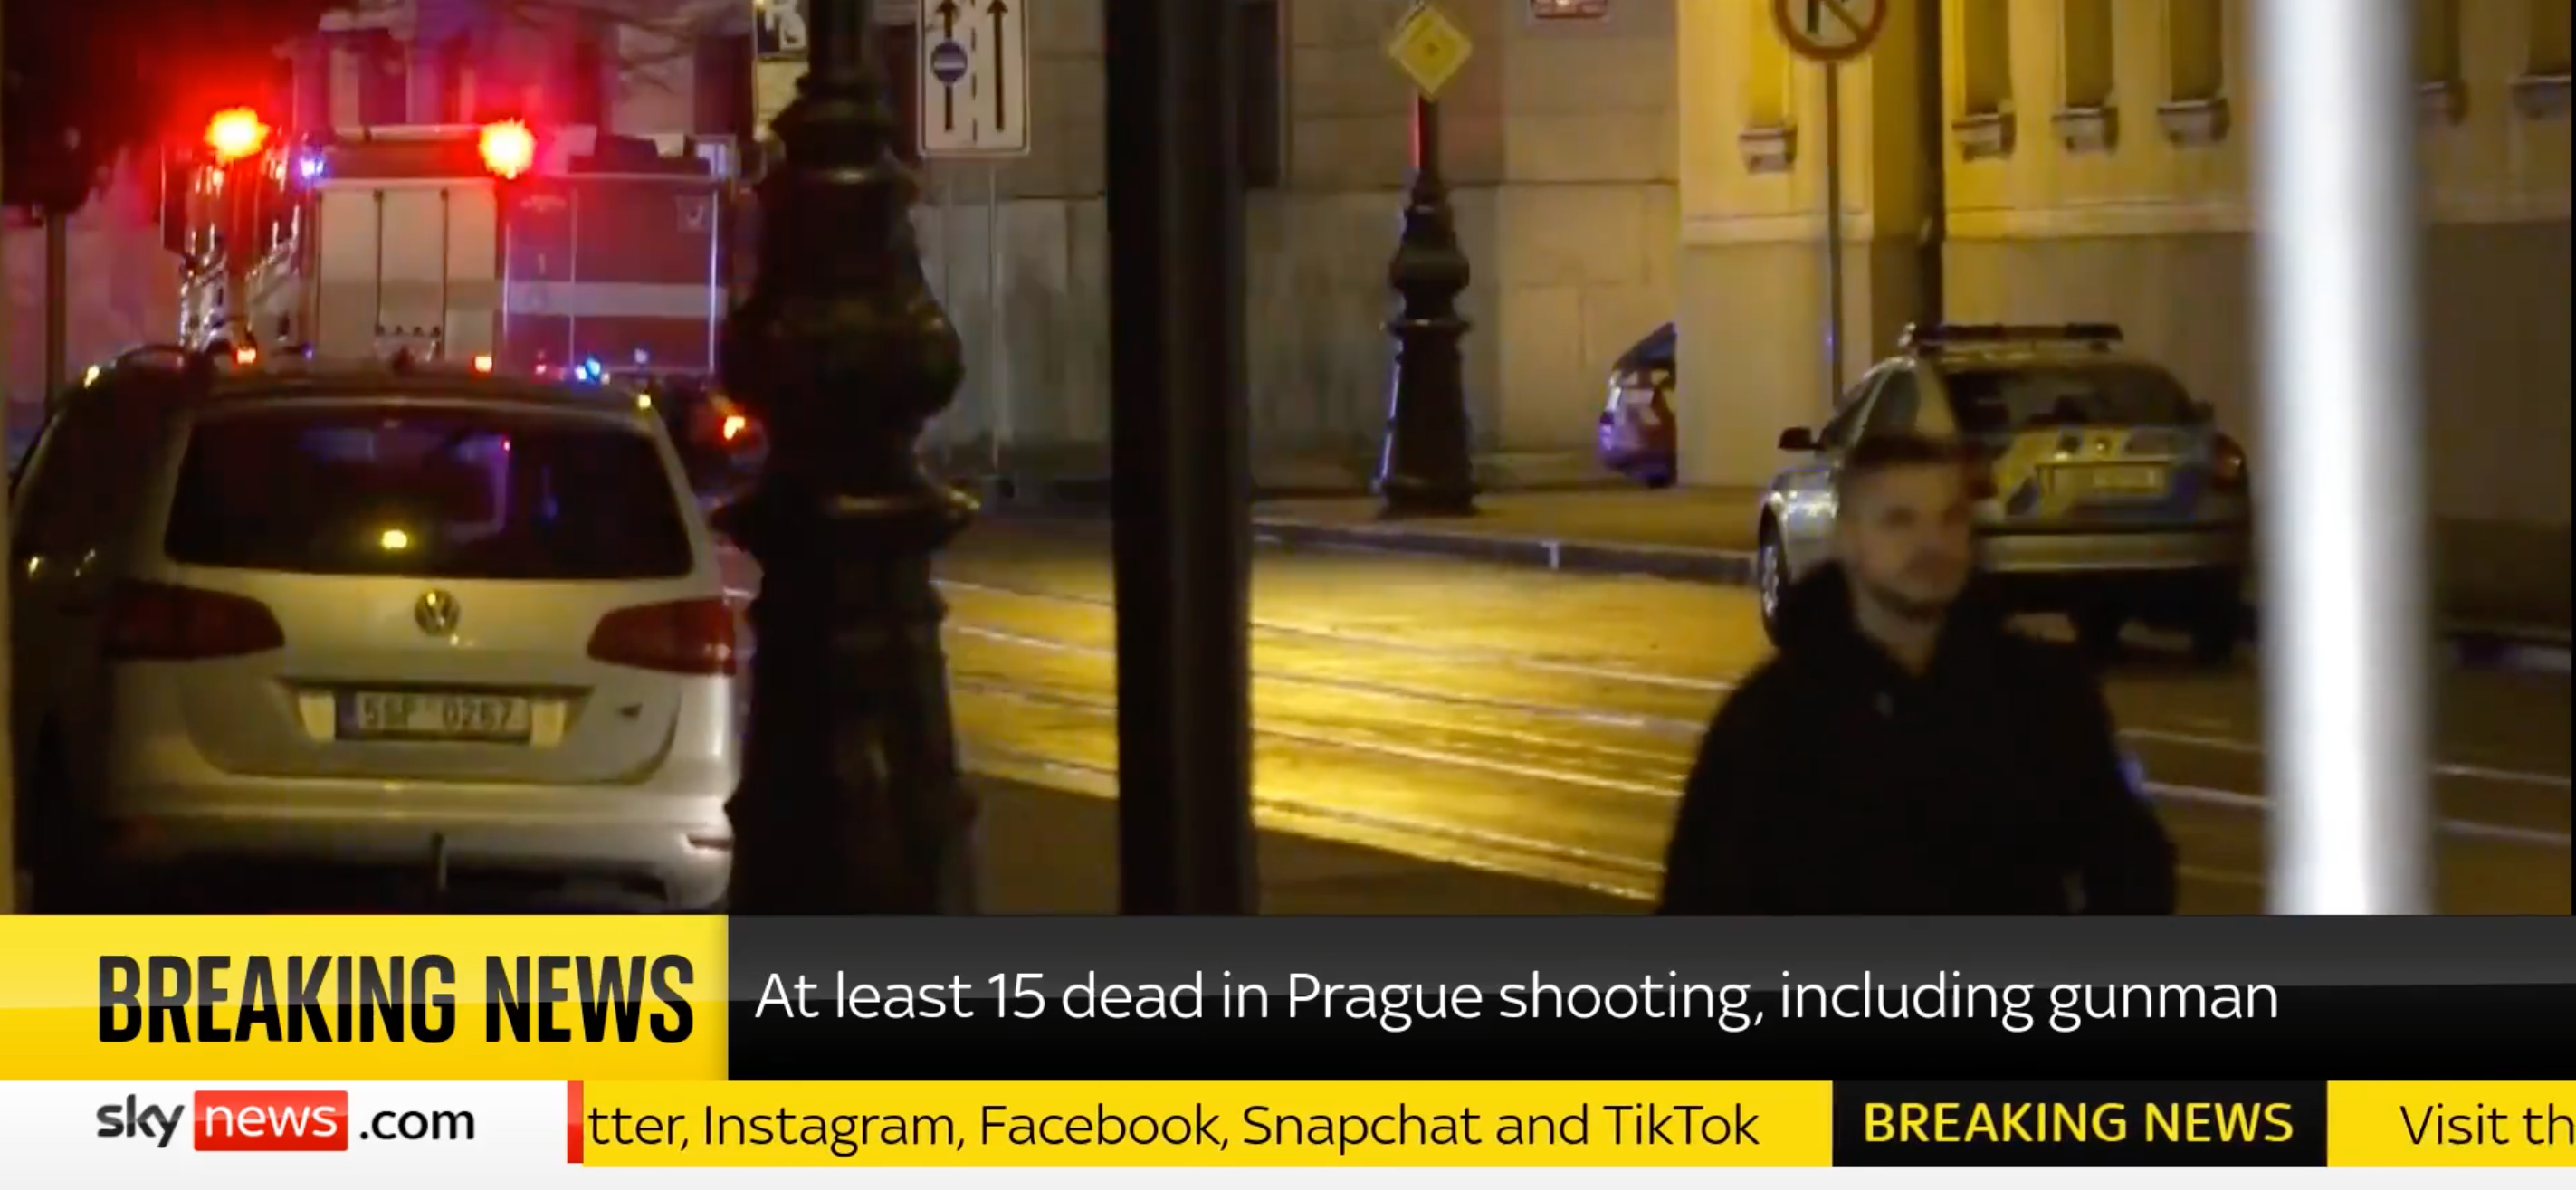 Prague Mass Shooter Dead, Confirmed As 24-Year-Old Student [VIDEO]